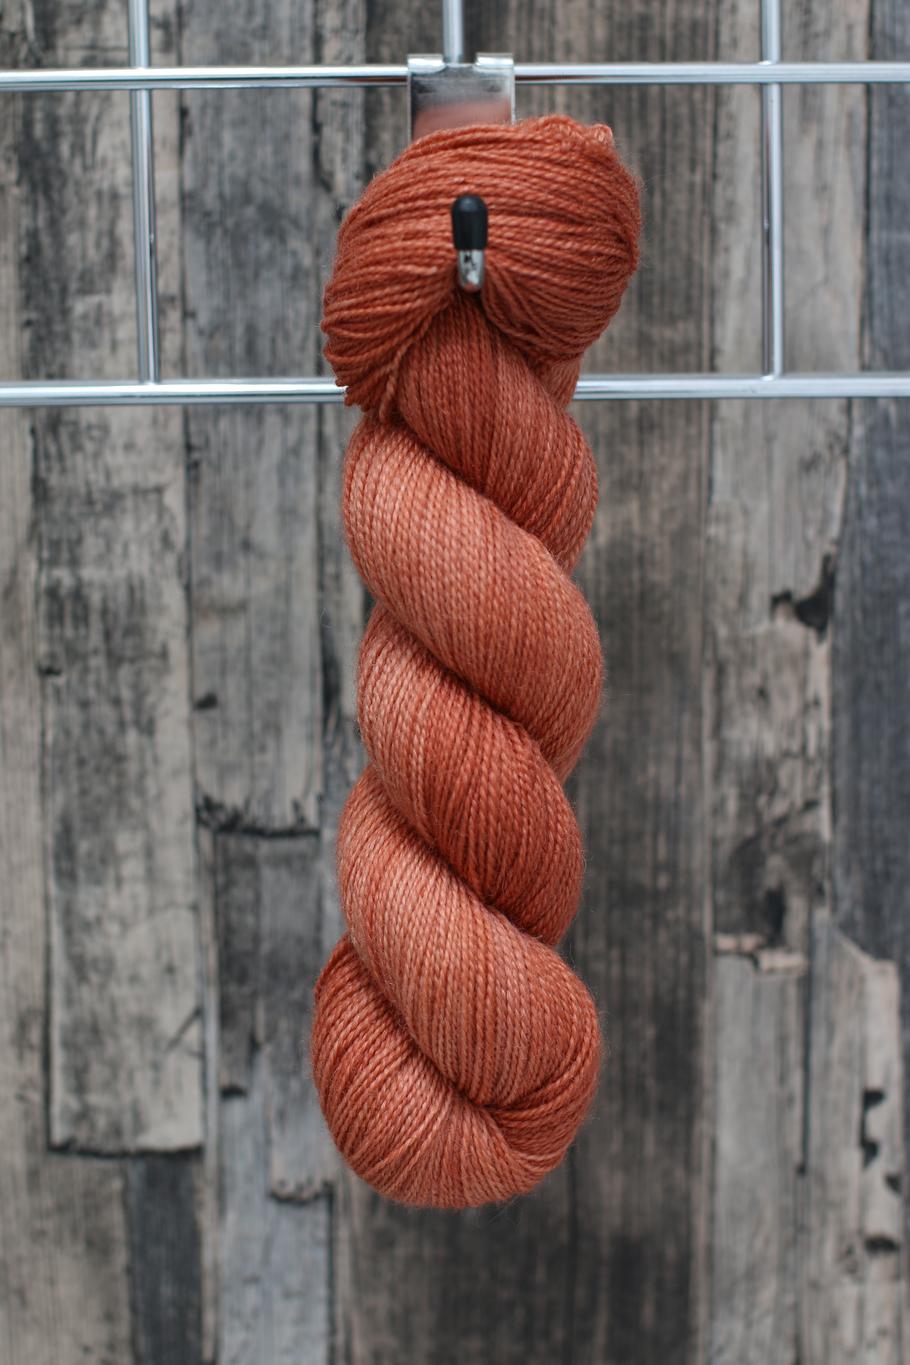 A single skein of yarn hanging from a hook in a variegated shade of soft orange